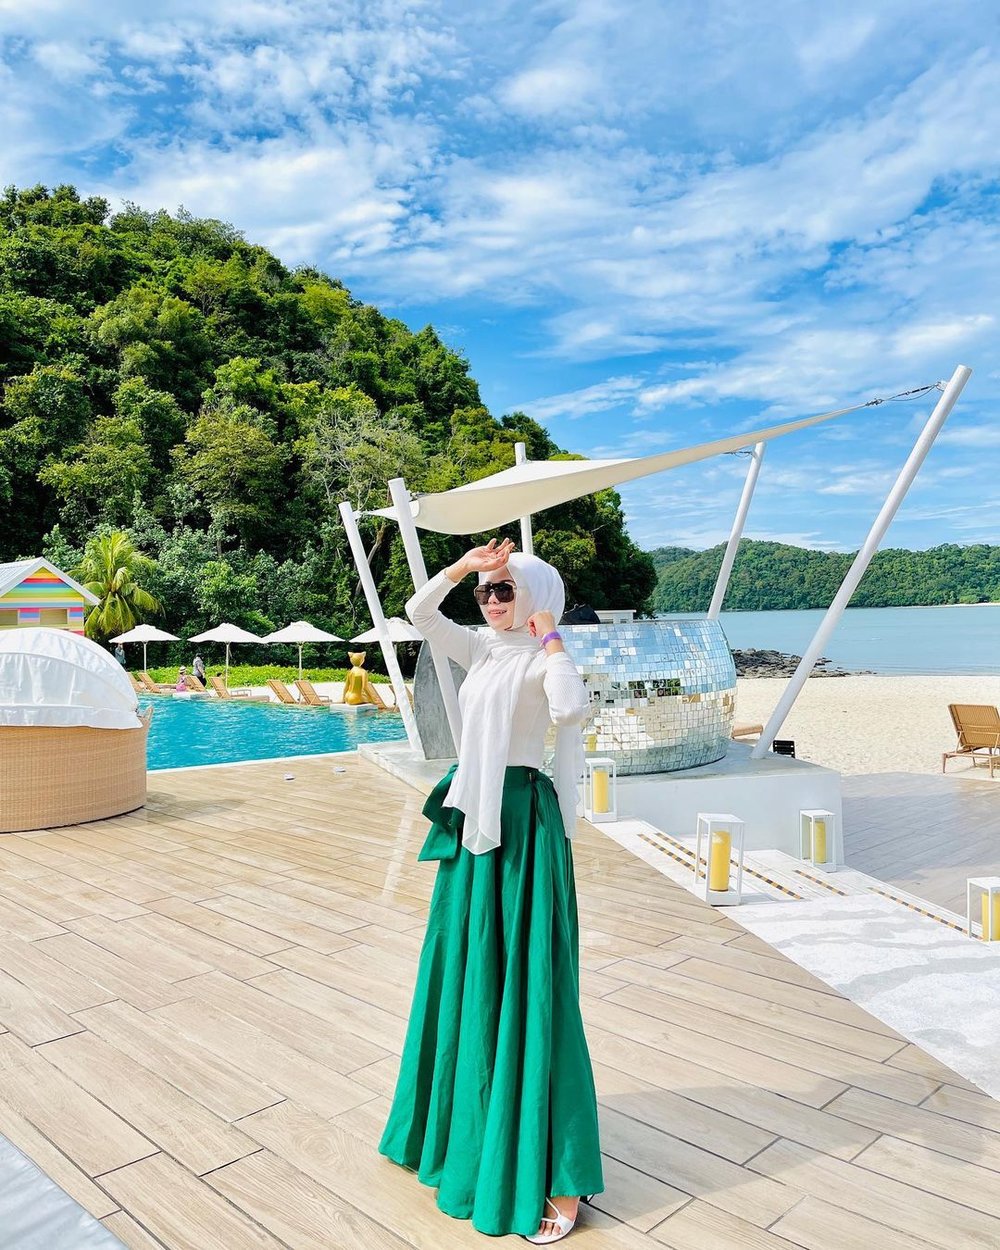 15 Best Langkawi Hotels 2023: Beautiful Island Resorts For The Perfect ...